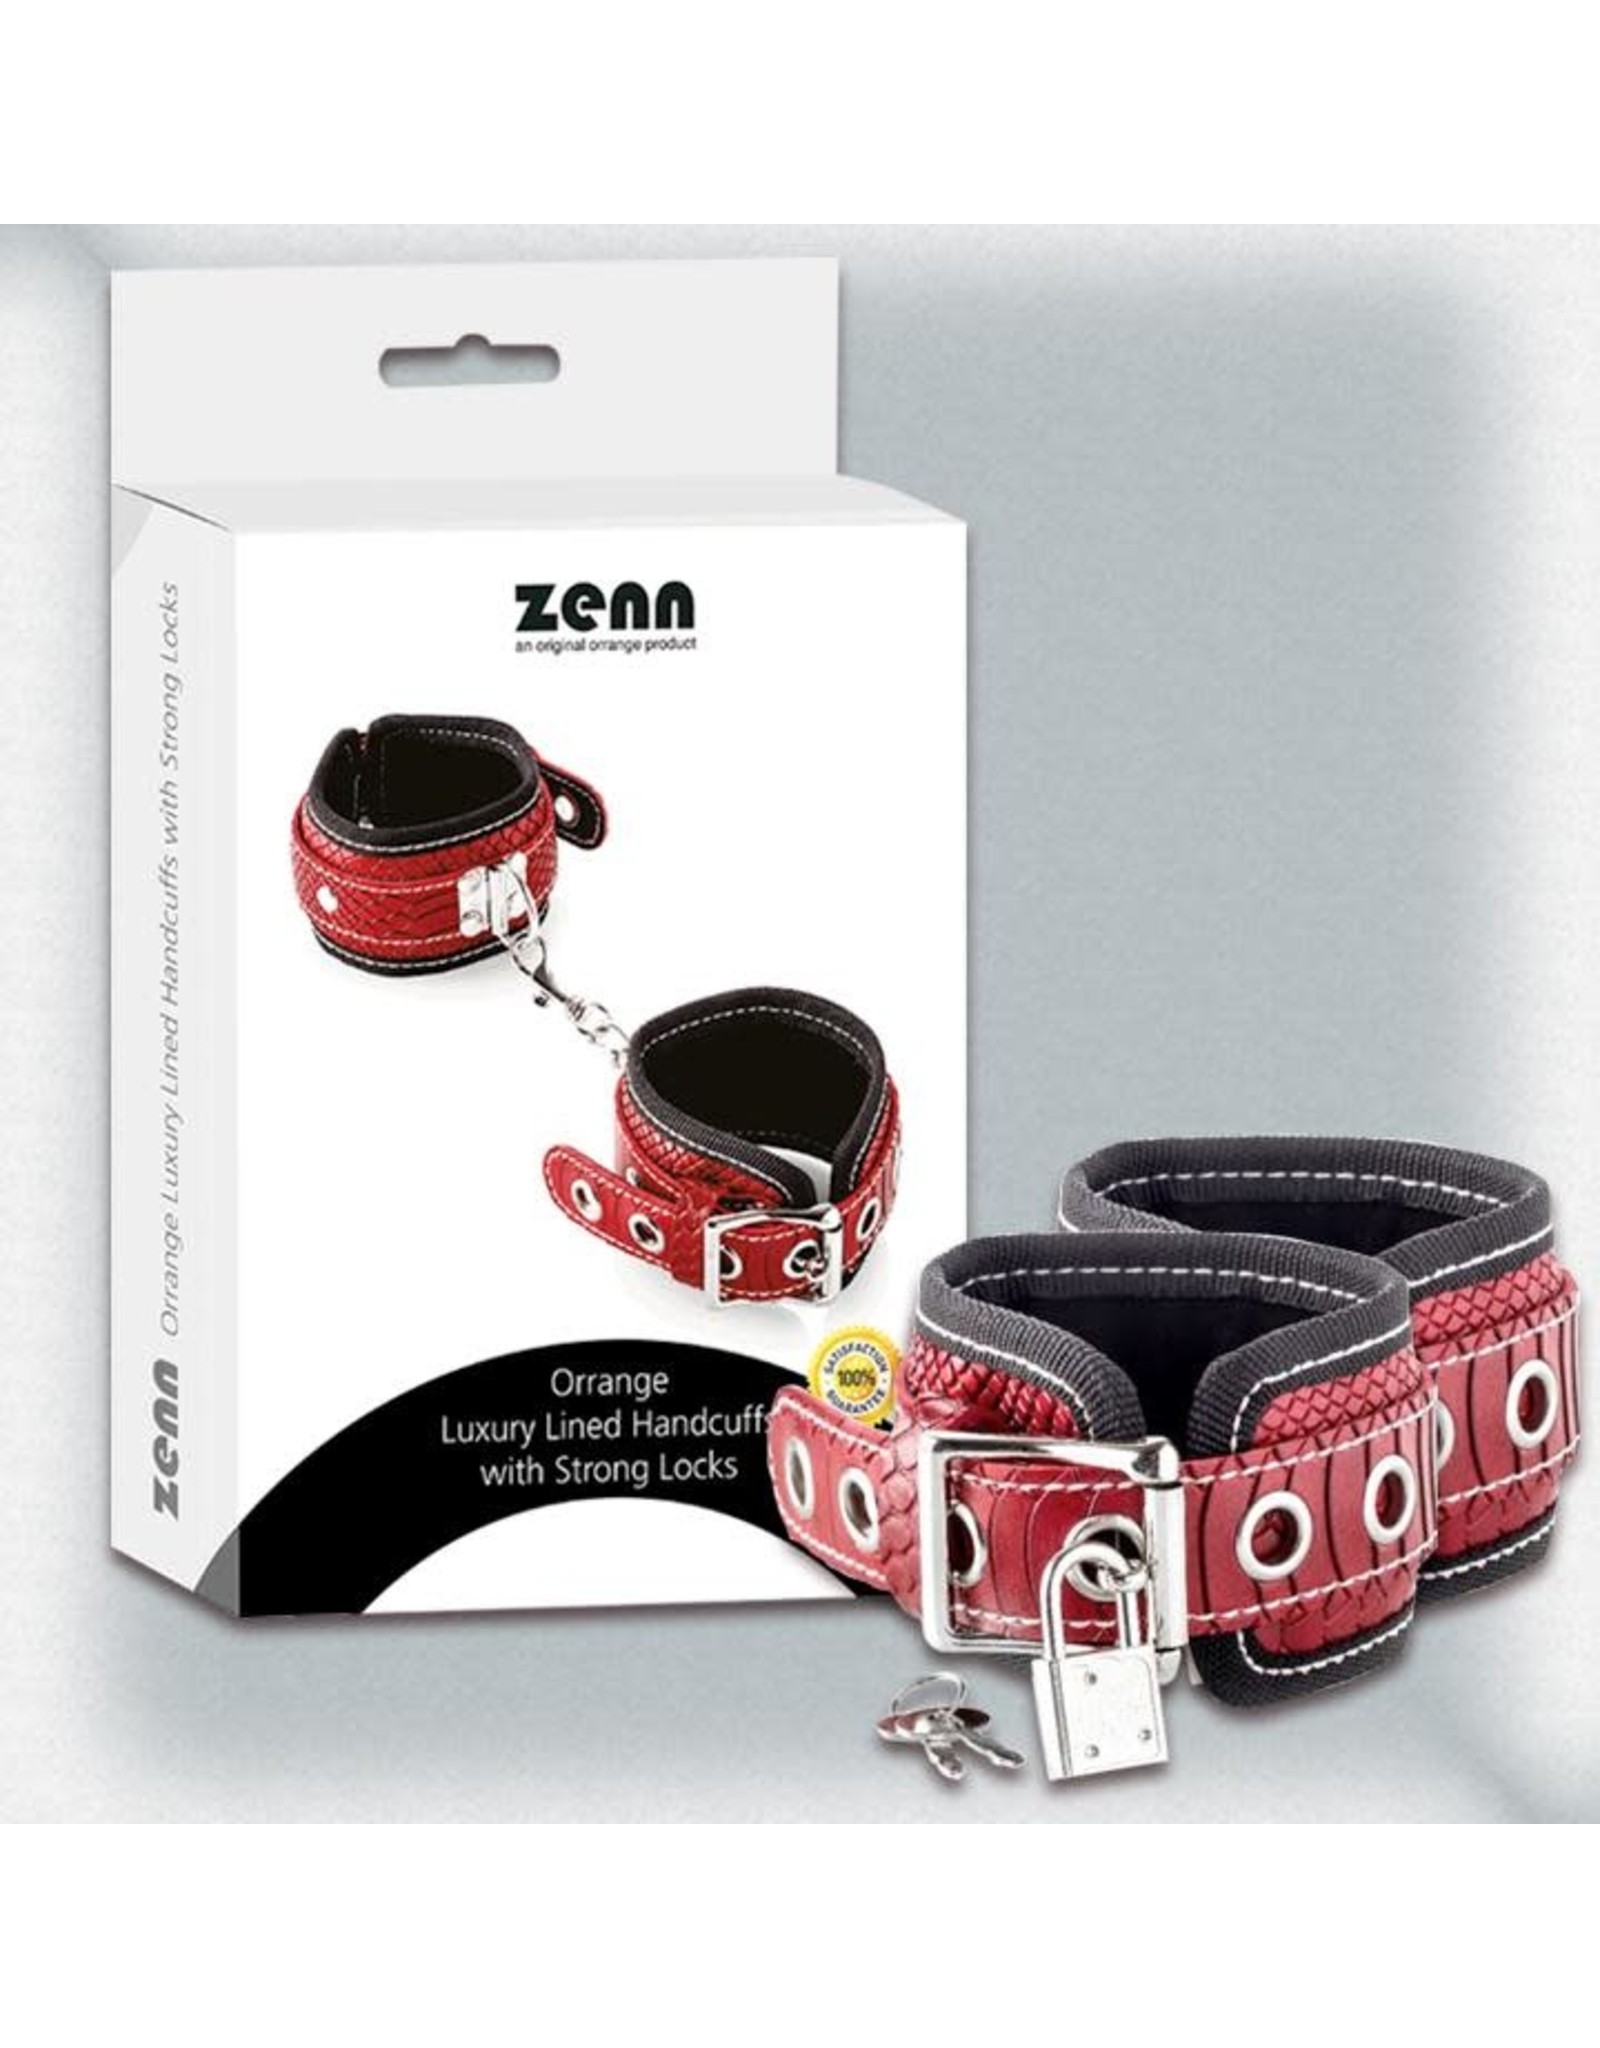 Zenn LUXURY LINED HANDCUFFS with STRONG LOCKS